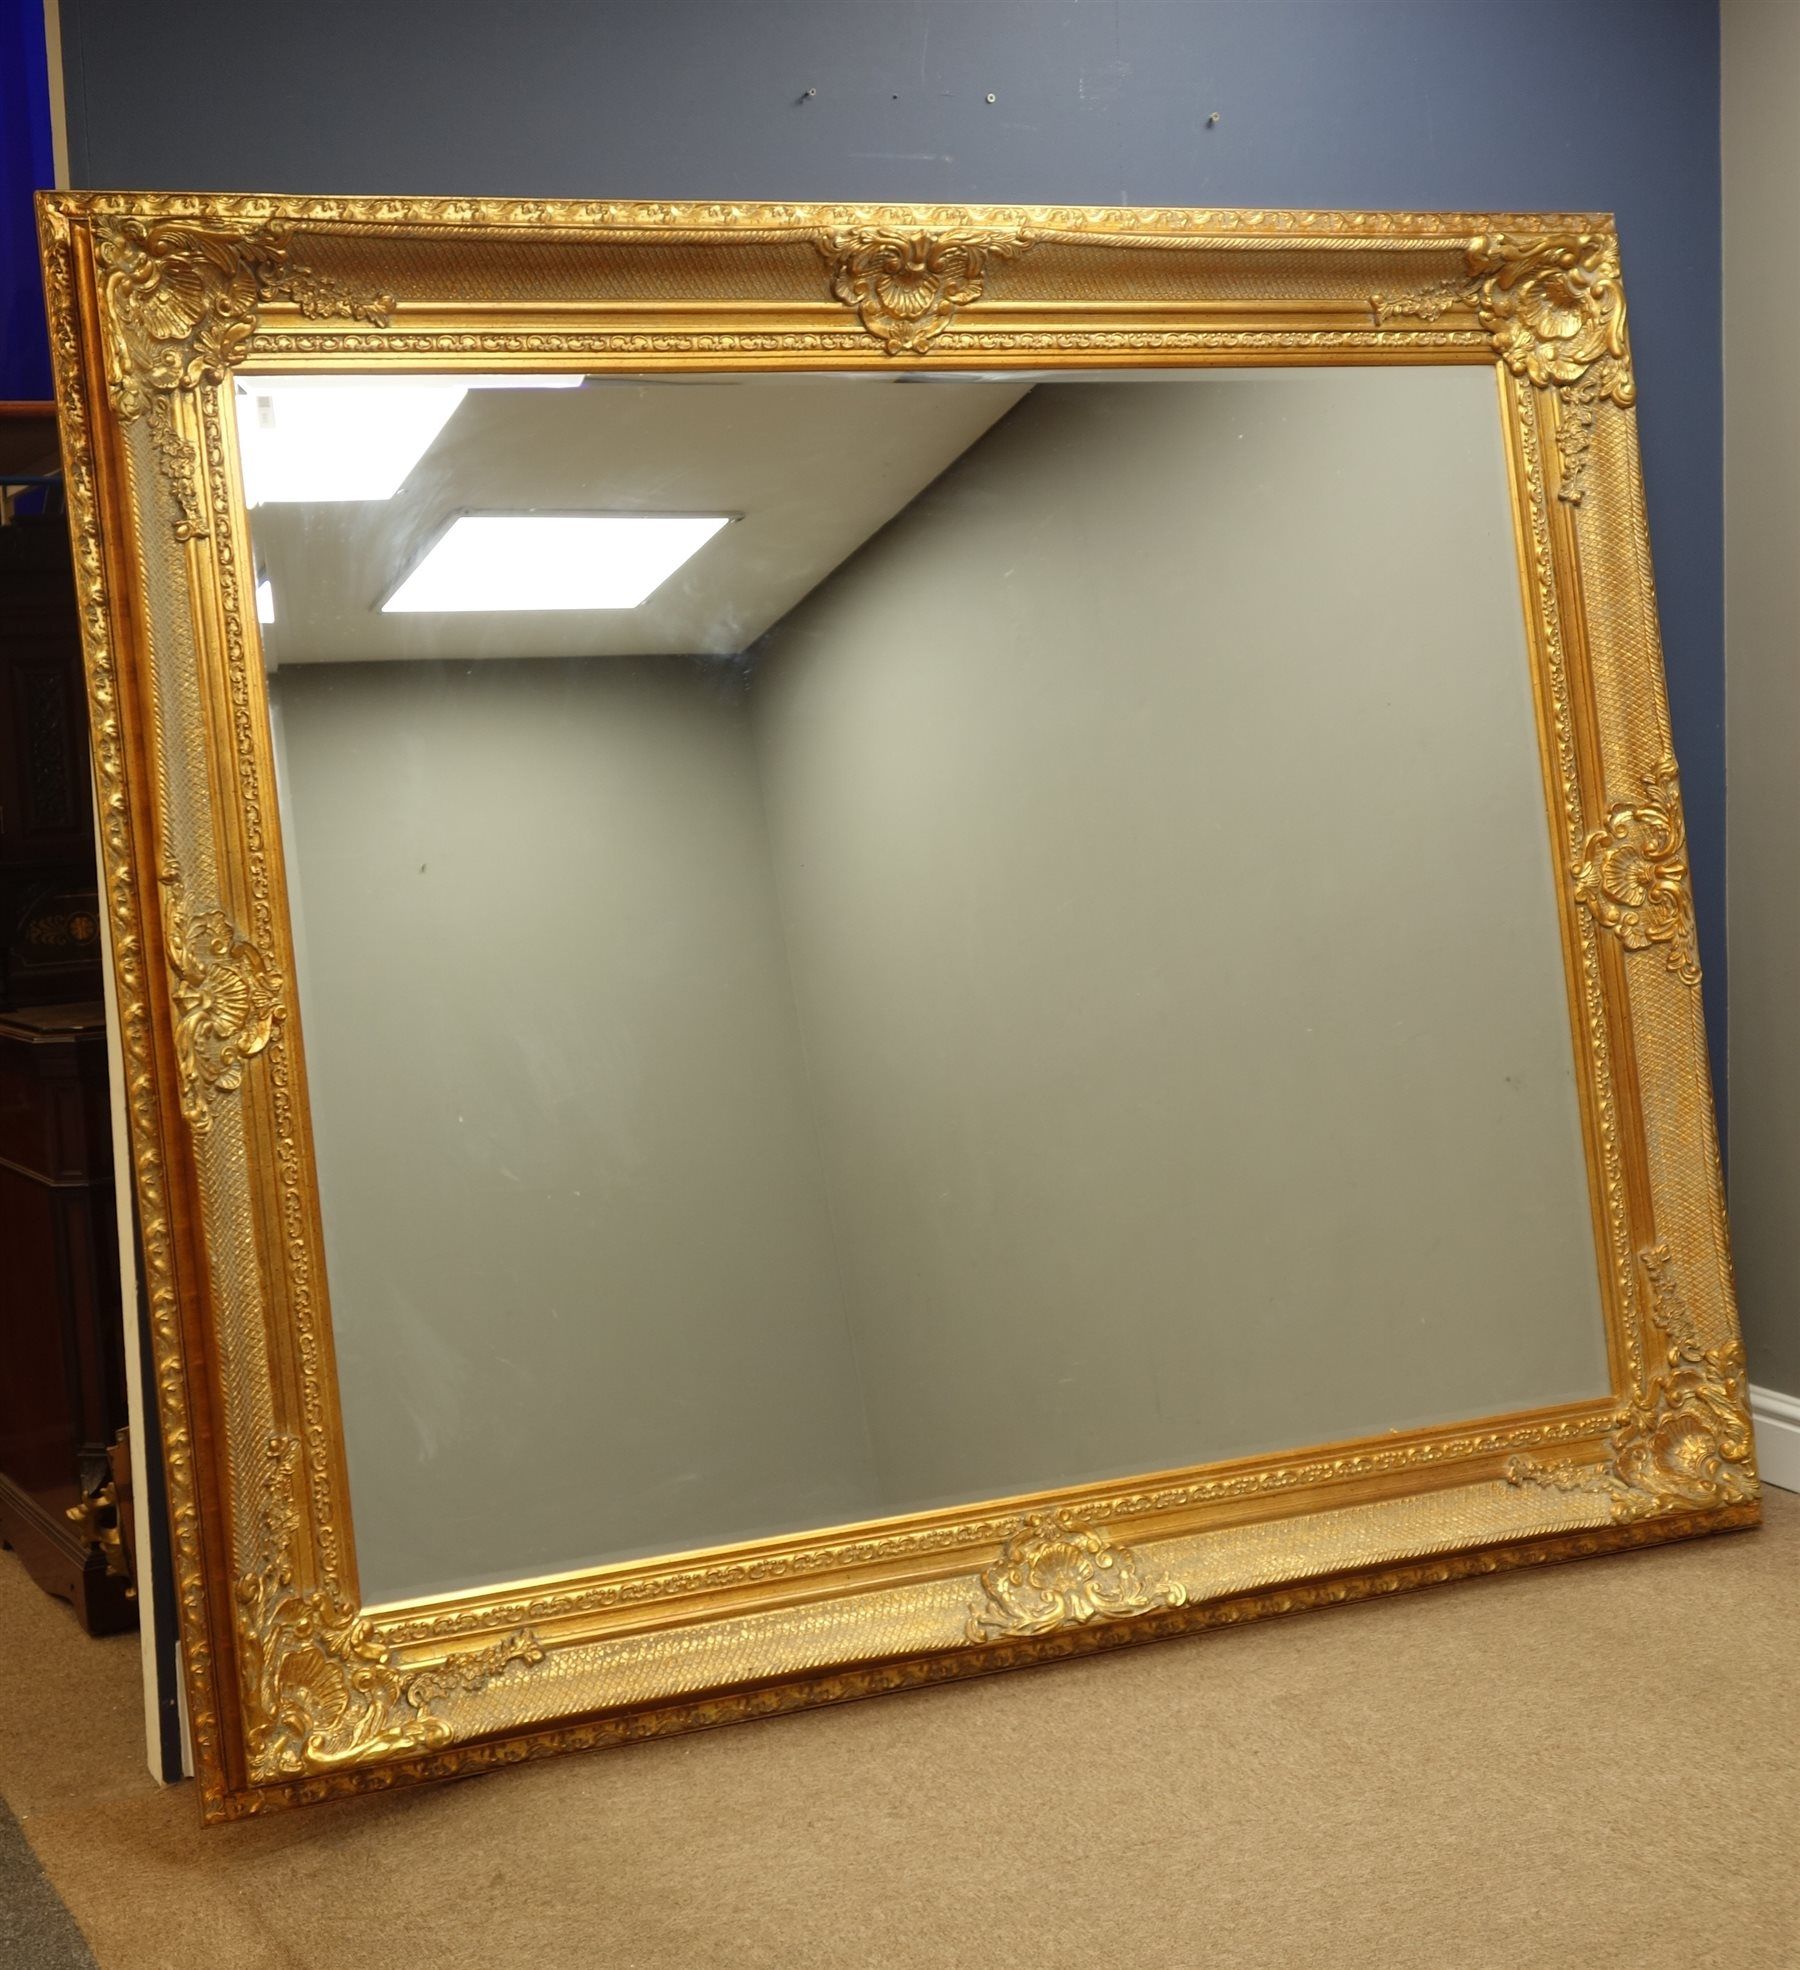 Large Rectangular Bevelled Edge Wall Mirror In Ornate Swept Gilt Frame Pertaining To Edged Wall Mirrors (View 3 of 15)